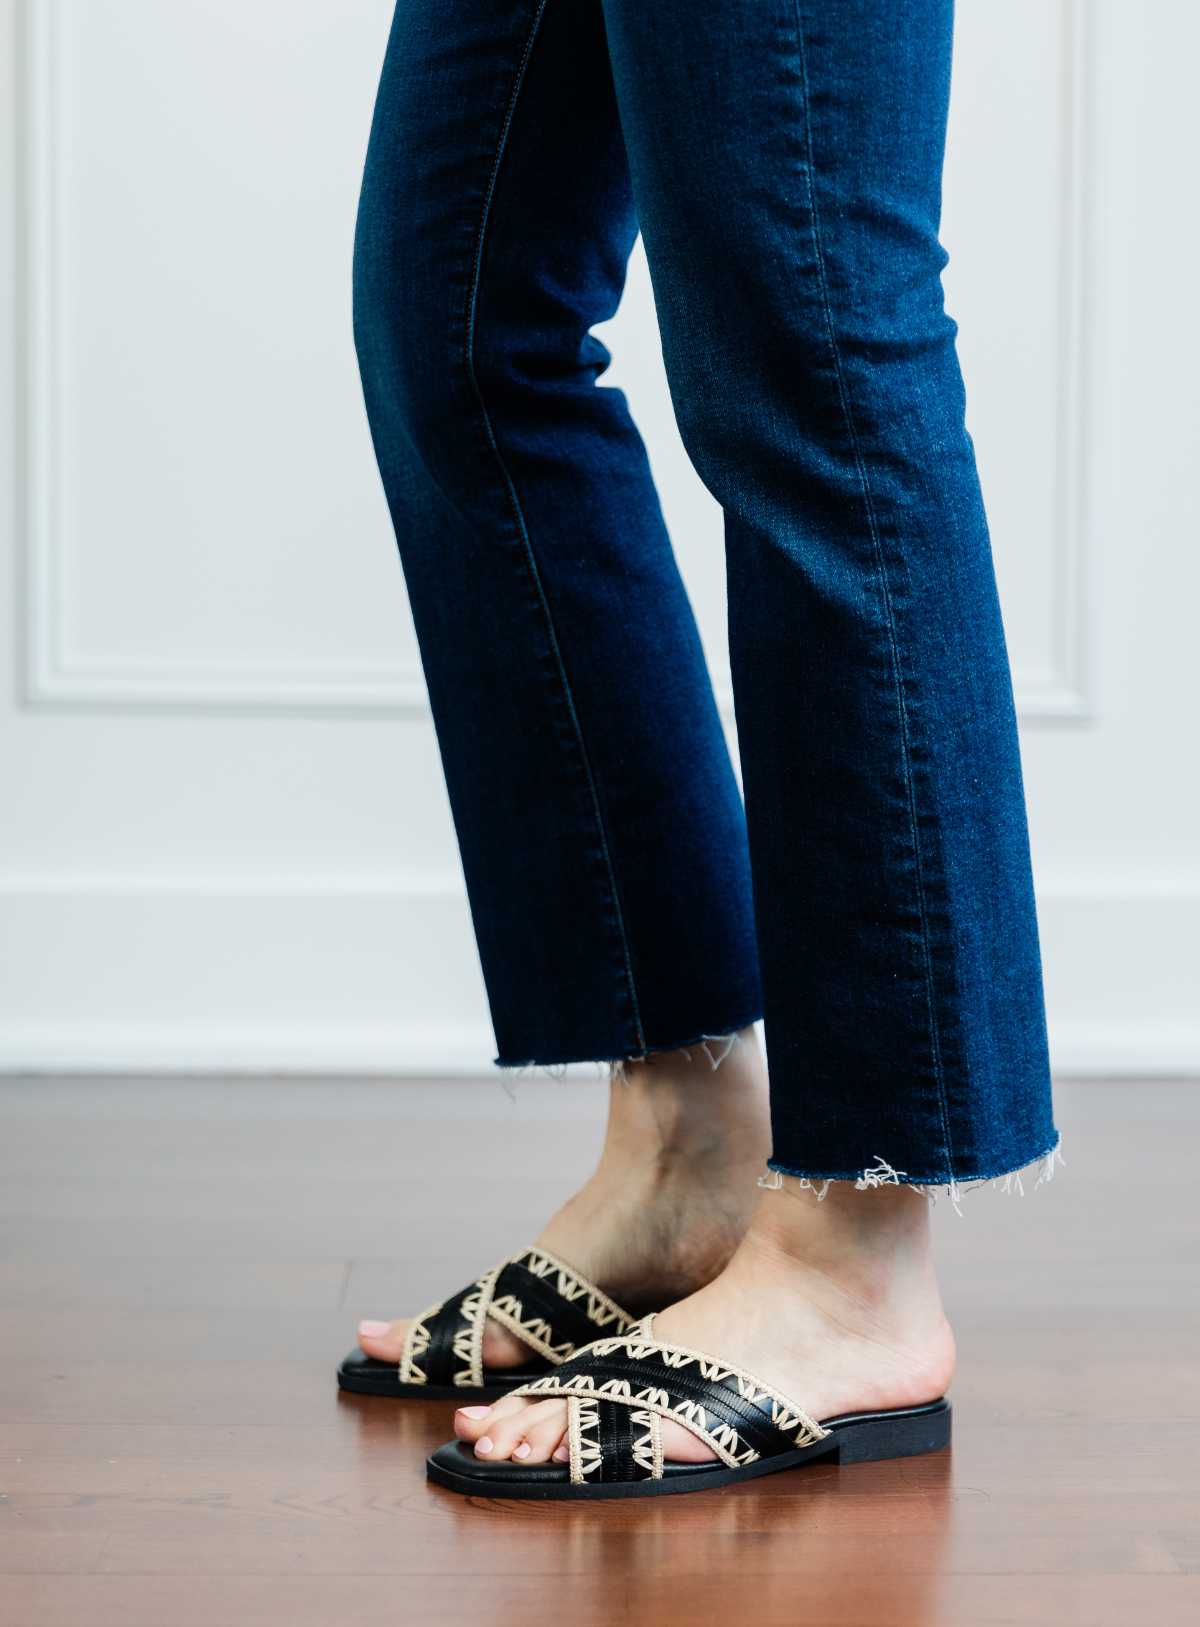 Cropped view of woman's legs wearing black criss cross low slides with raffia detail and kick flares.